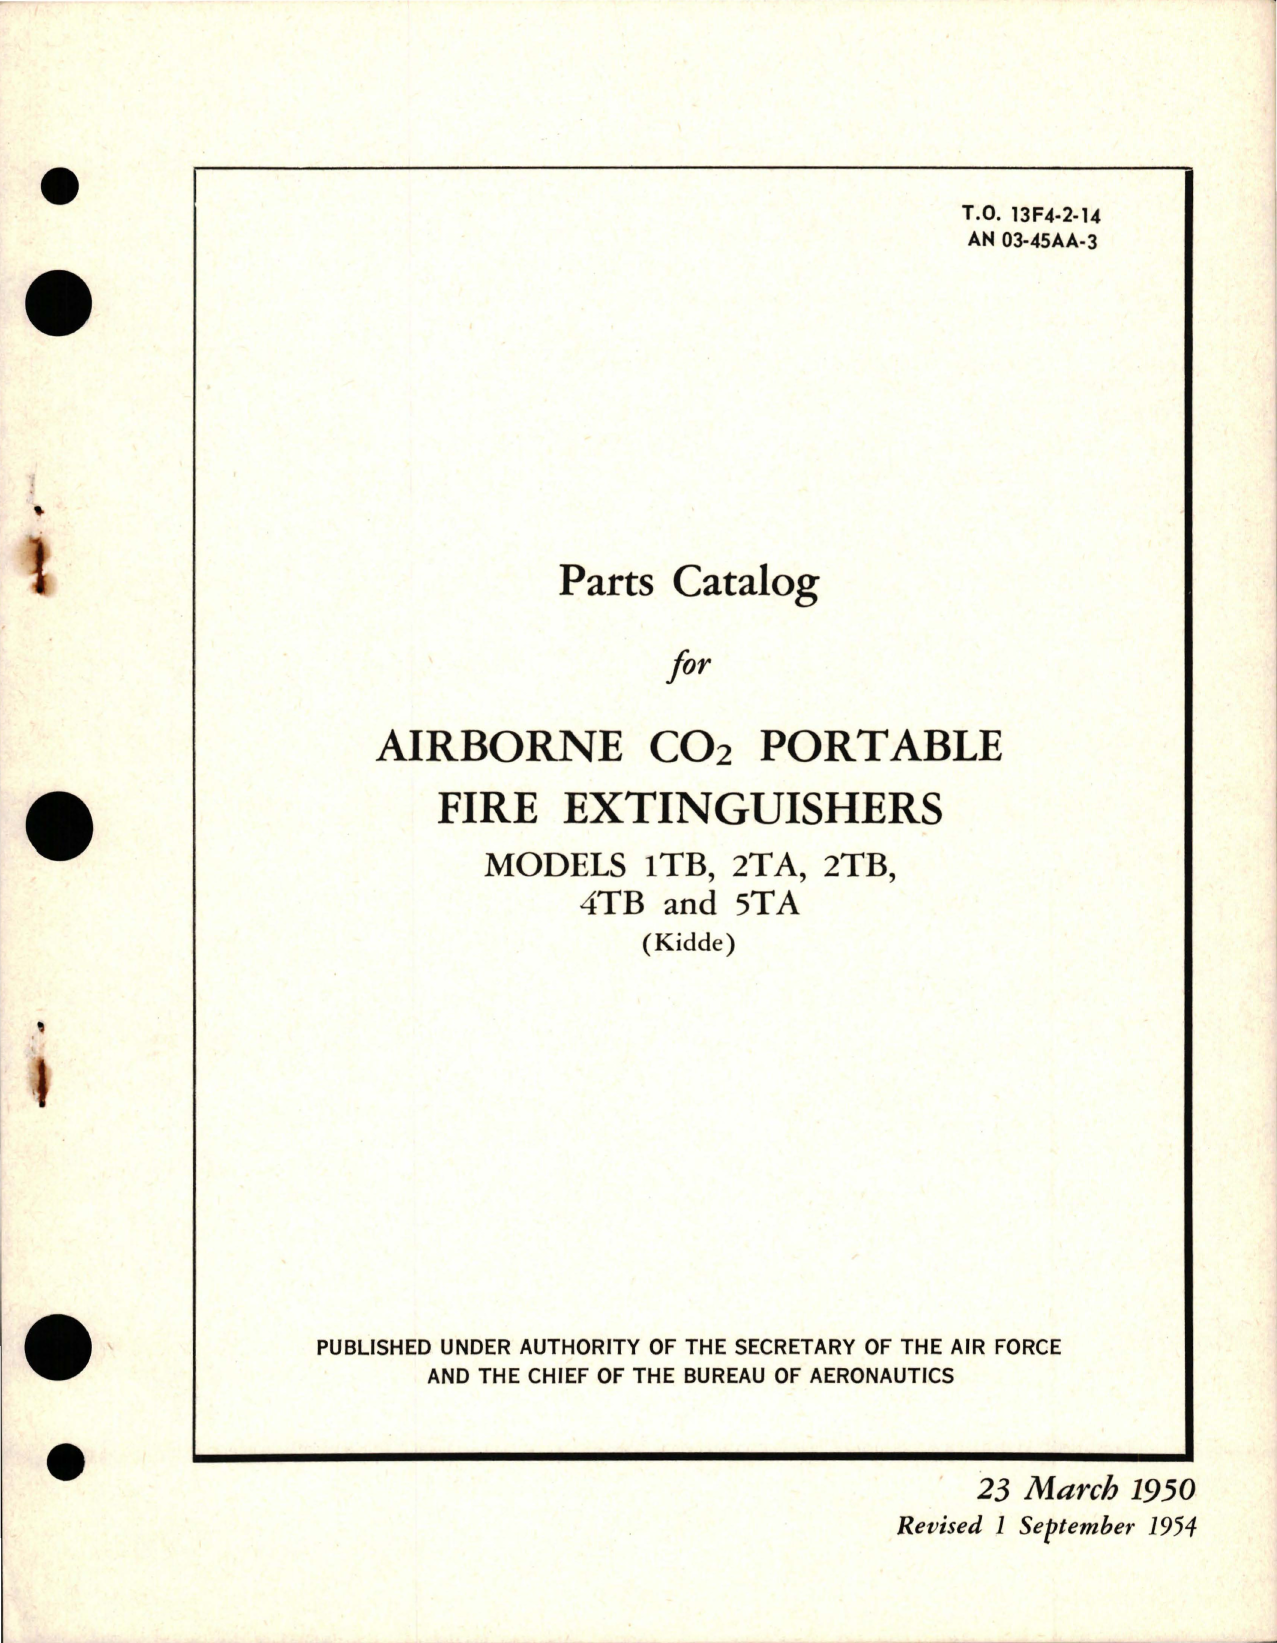 Sample page 1 from AirCorps Library document: Parts Catalog for Airborne CO2 Portable Fire Extinguishers - Models 1TB, 2TA, 2TB, 4TB, and 5TA